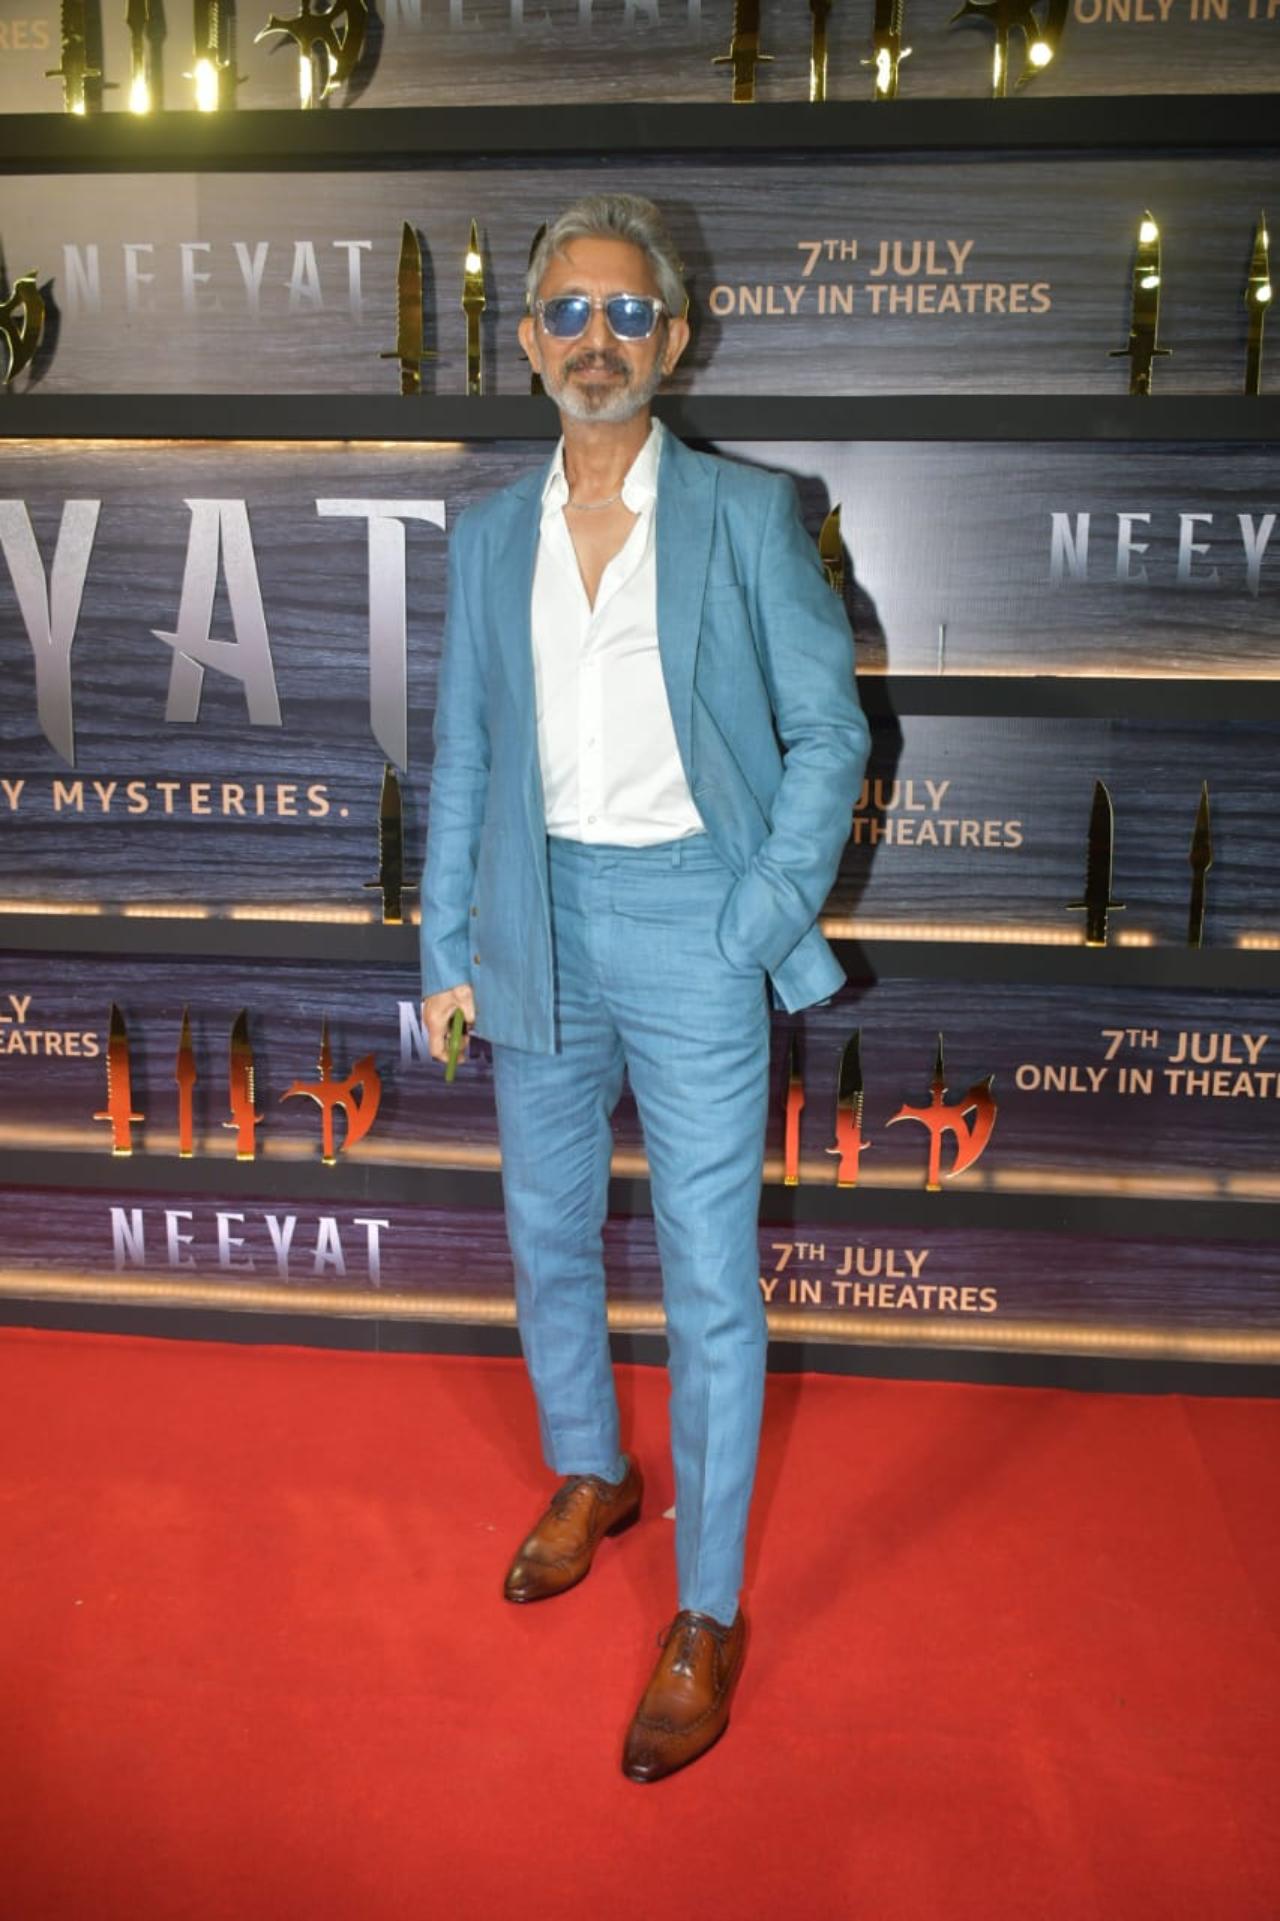 Neeraj Kabi, who plays a pivotal character in the film, turned up in a sky blue suit looking all dapper